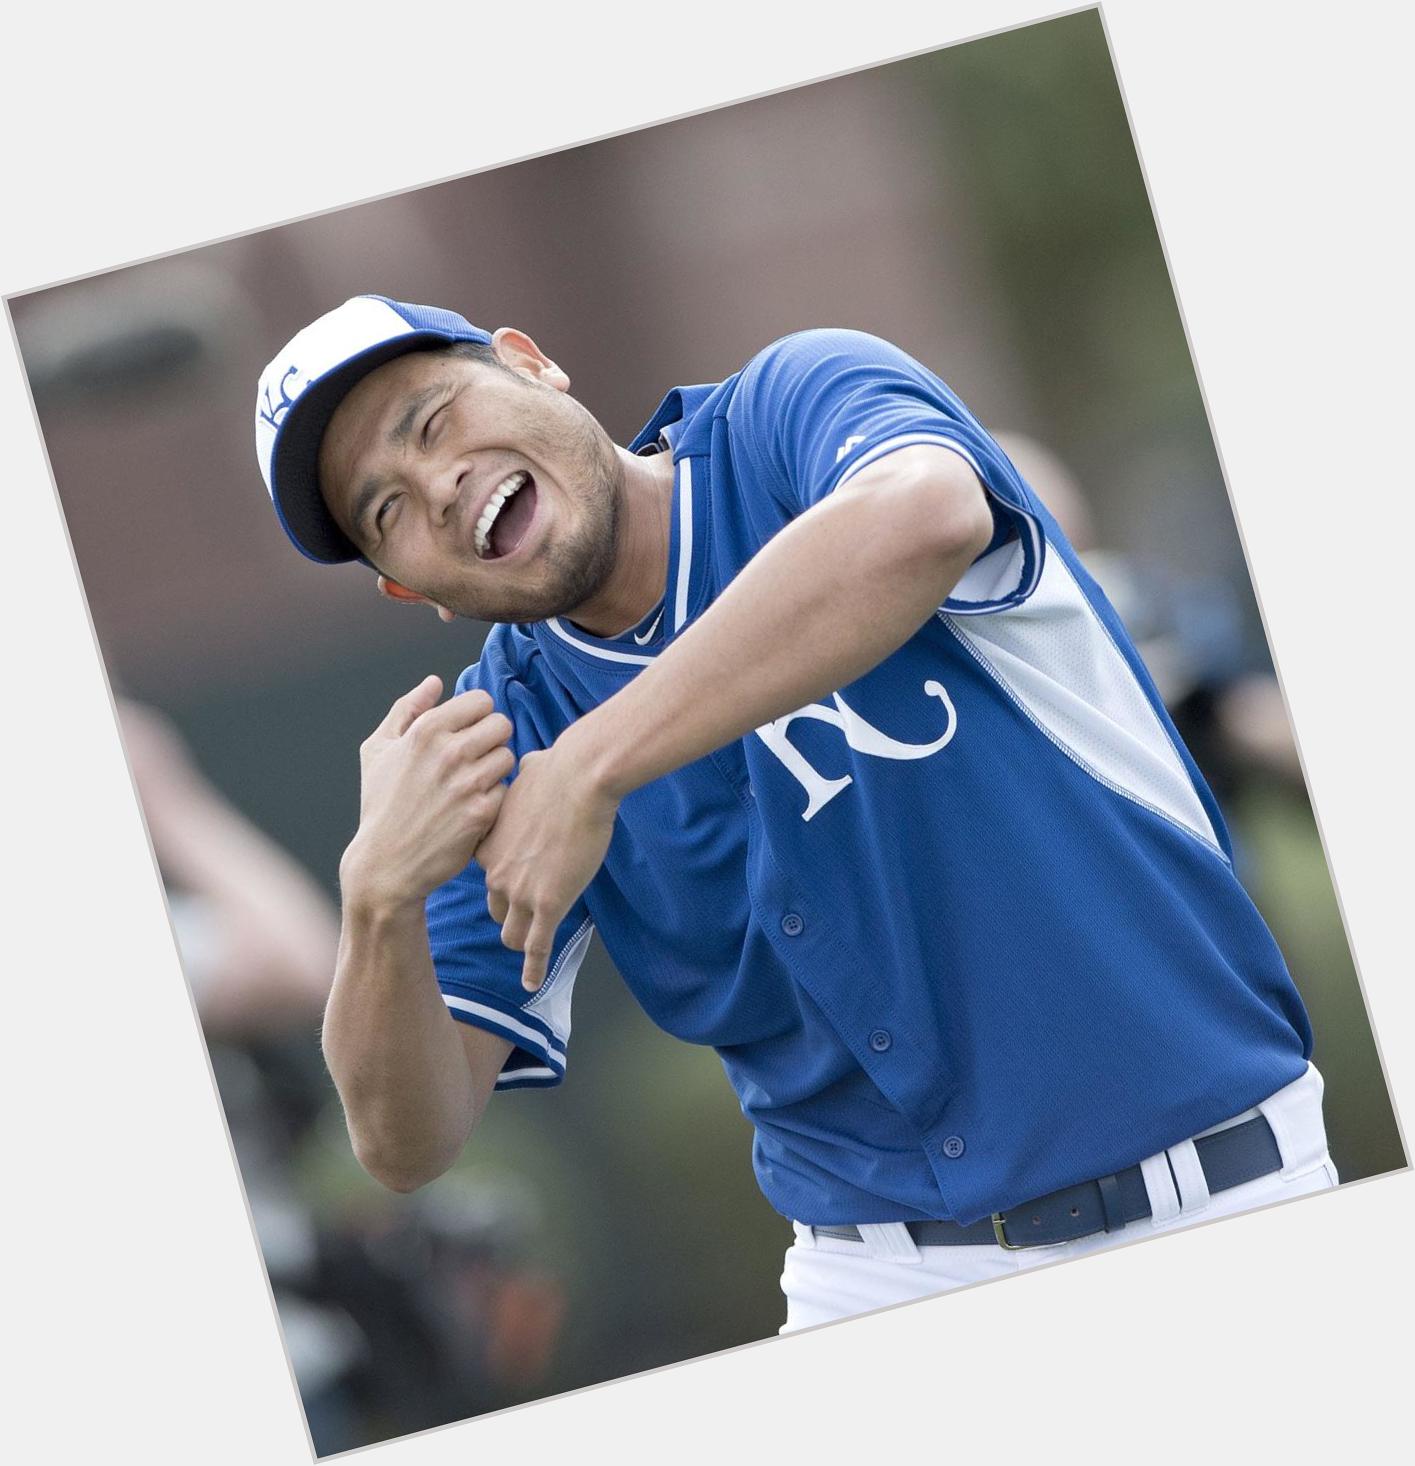 Happy 38th birthday to the funniest guy in baseball, Bruce Chen! 